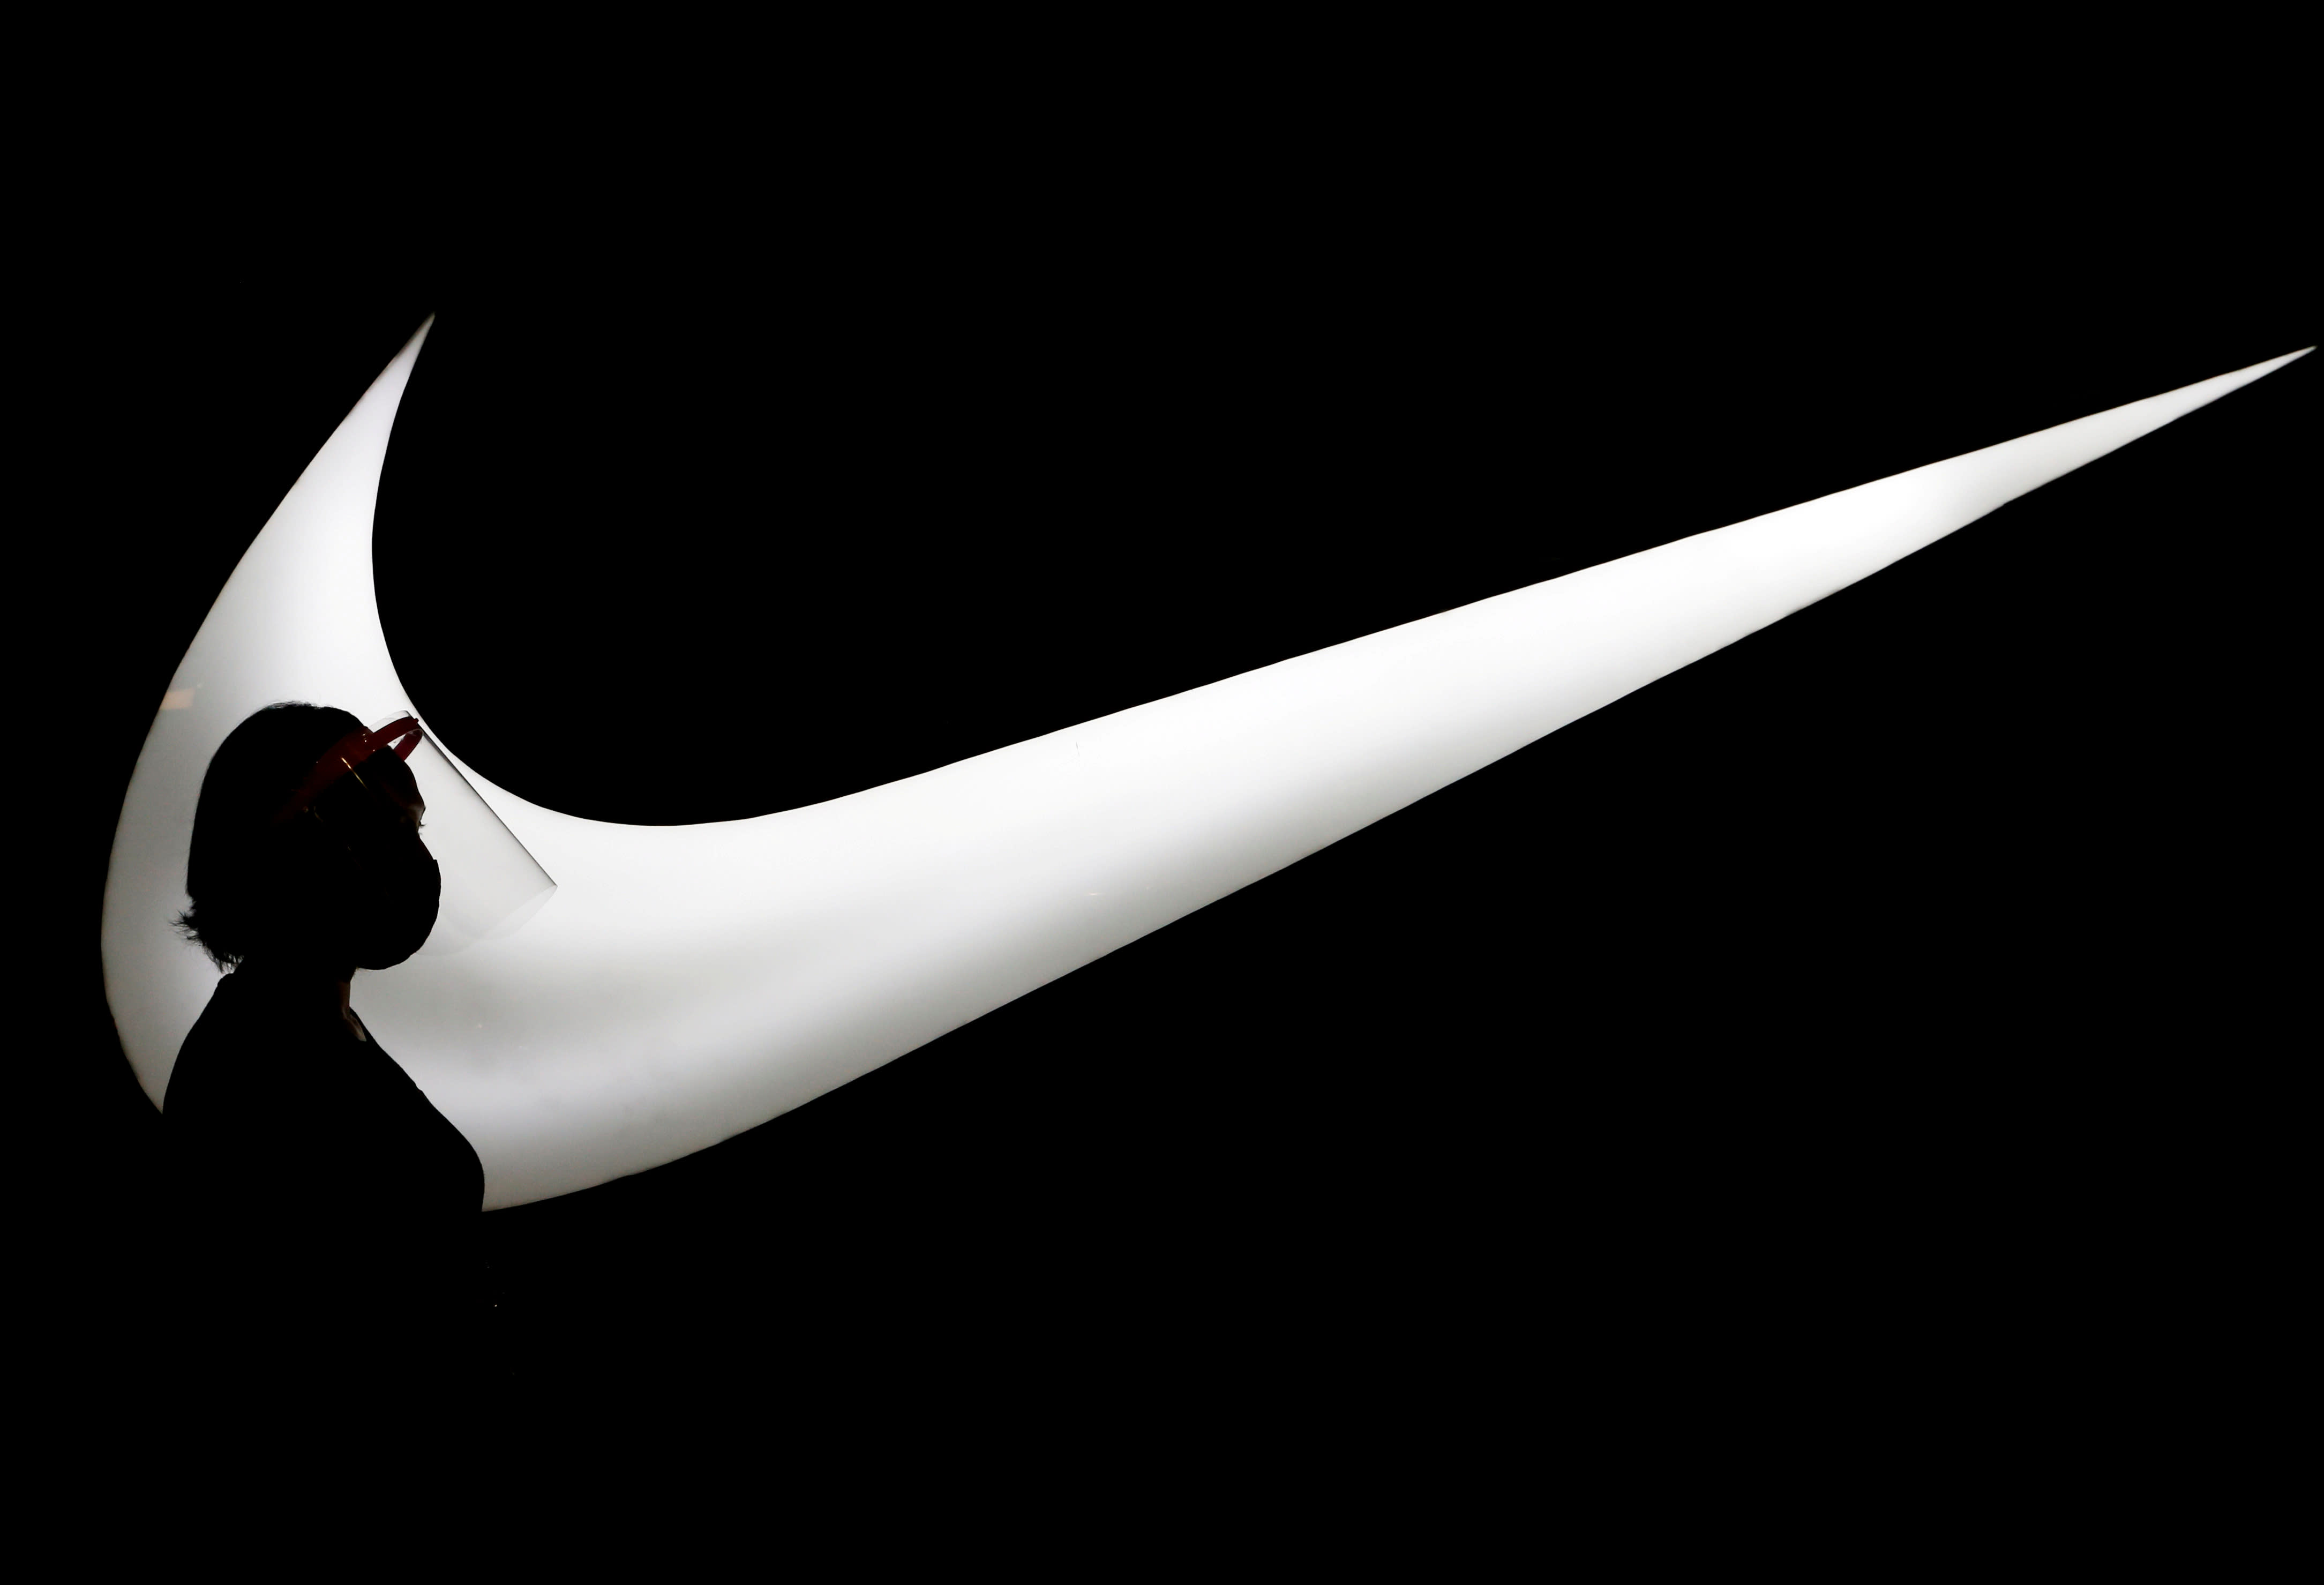 What's Happening to the Nike Swoosh?